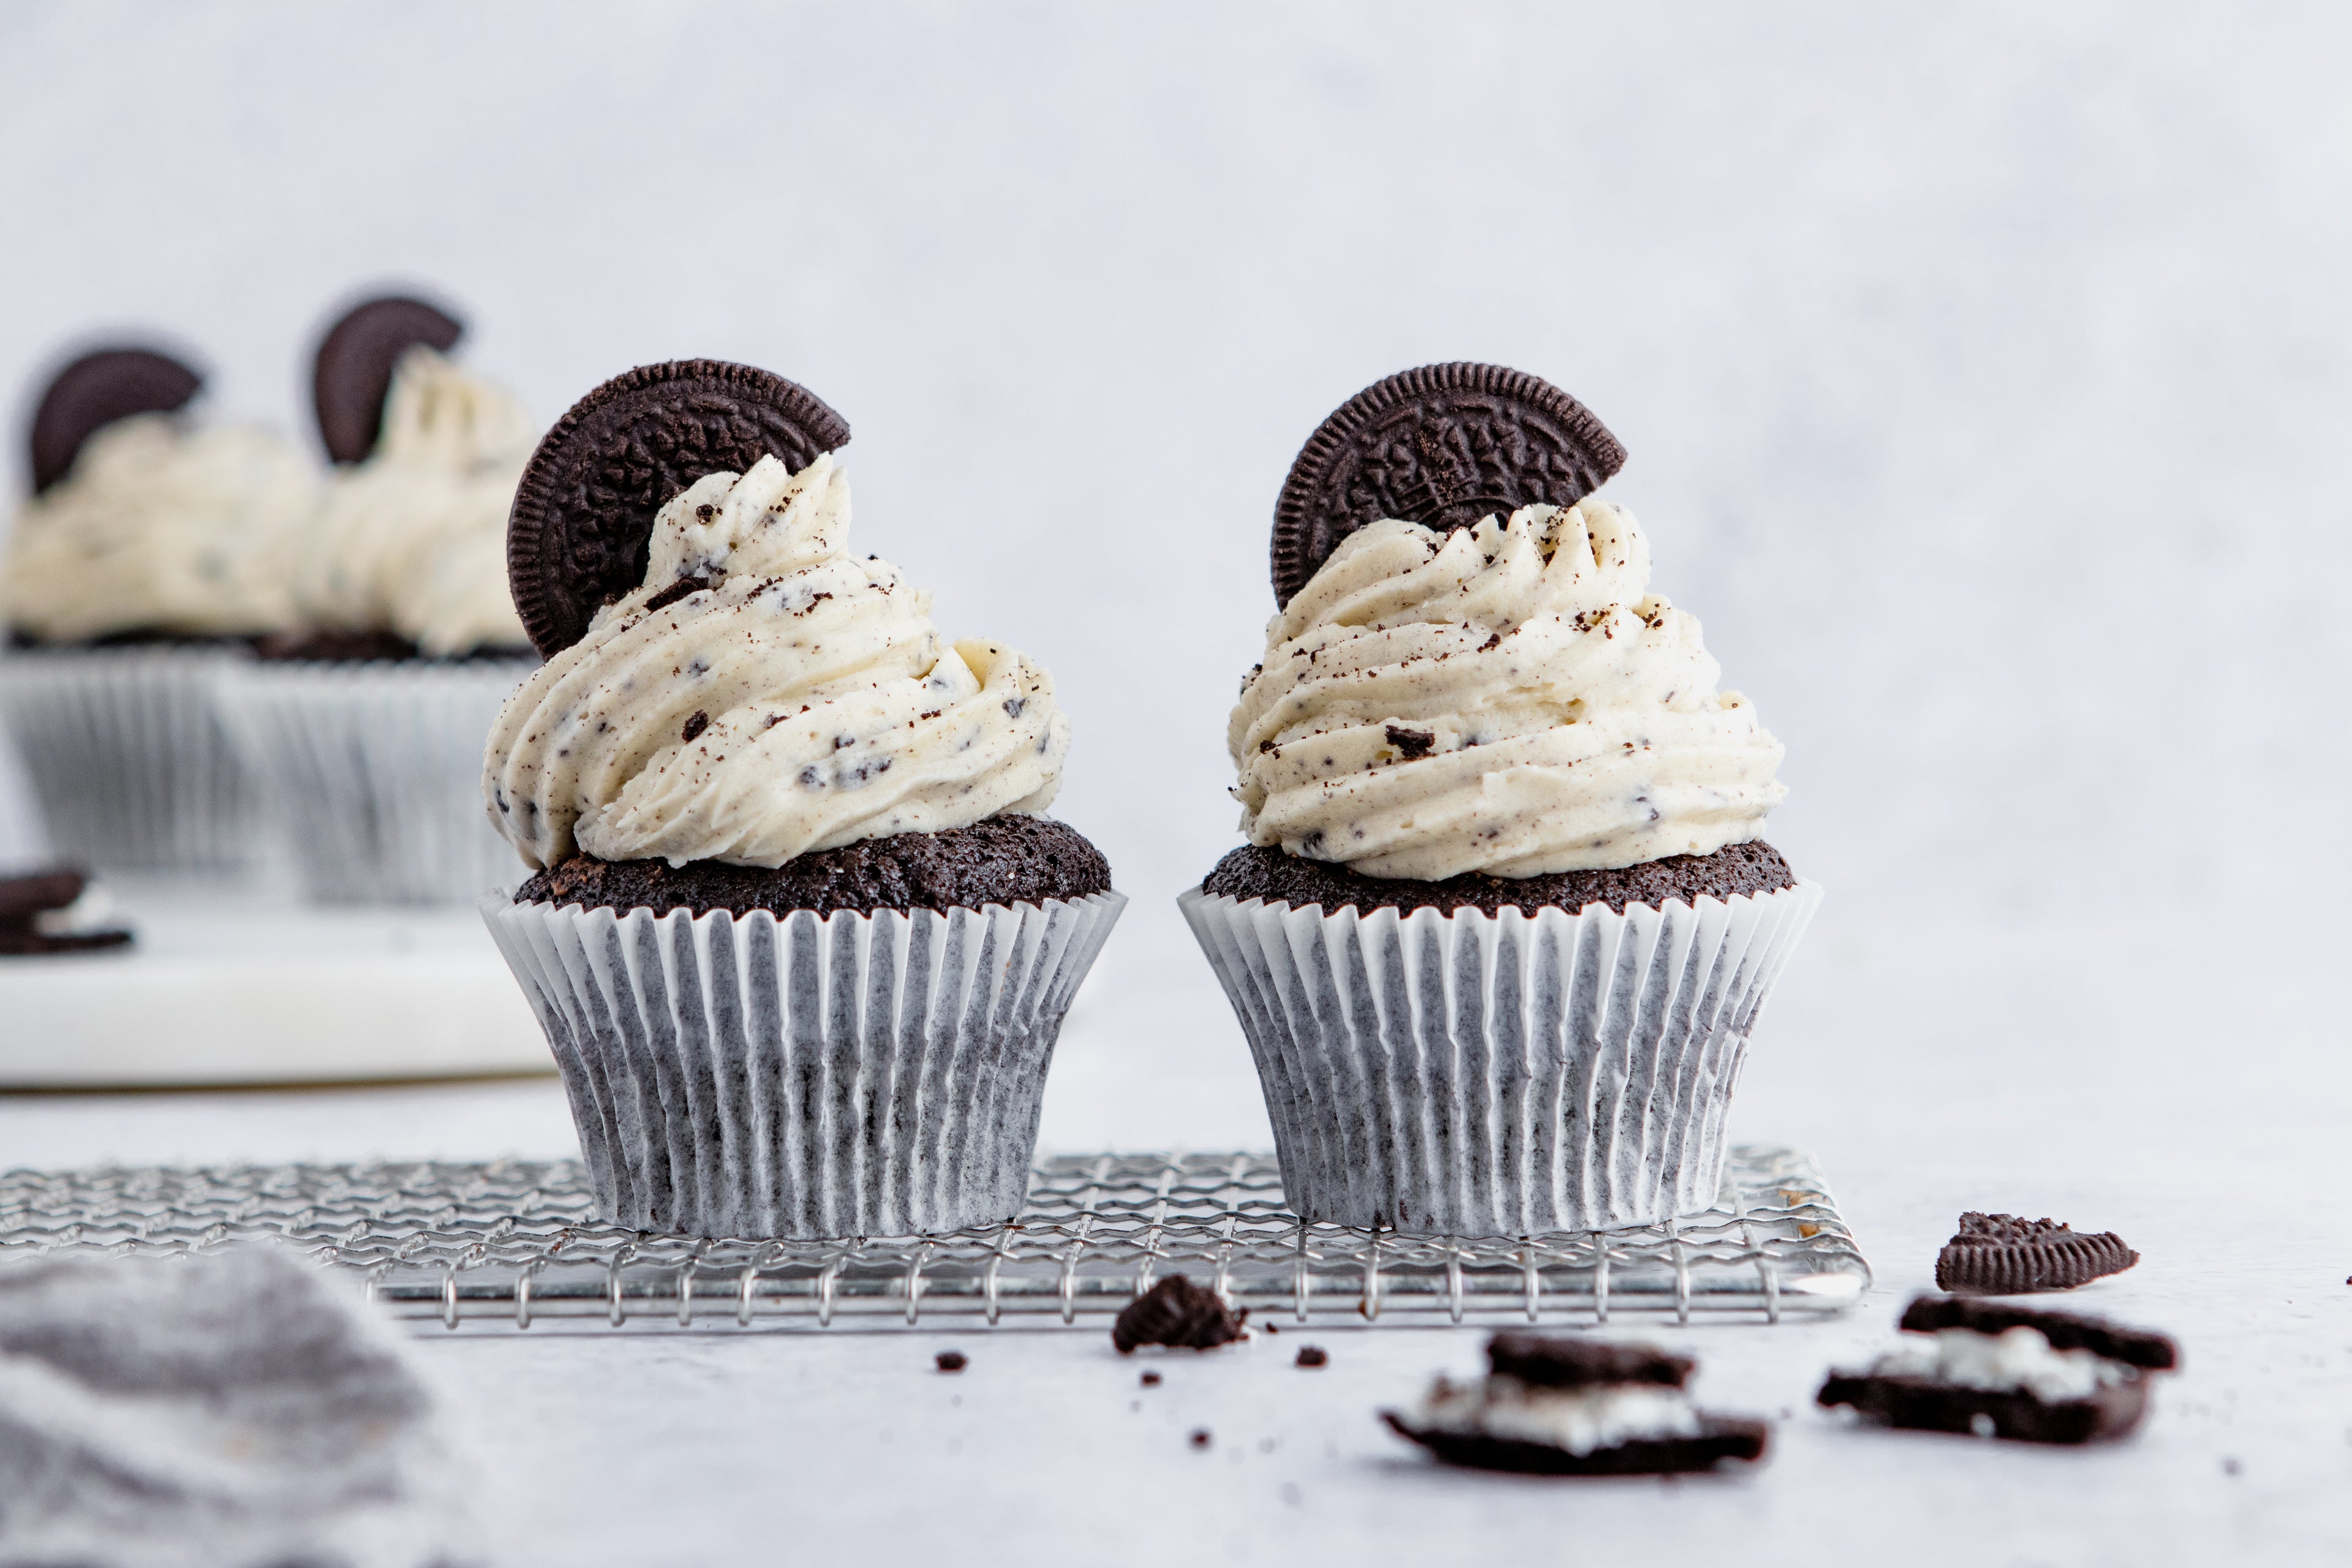 A pair of Oreo Cupcakes on a wire rack with oreo cookie crumbs